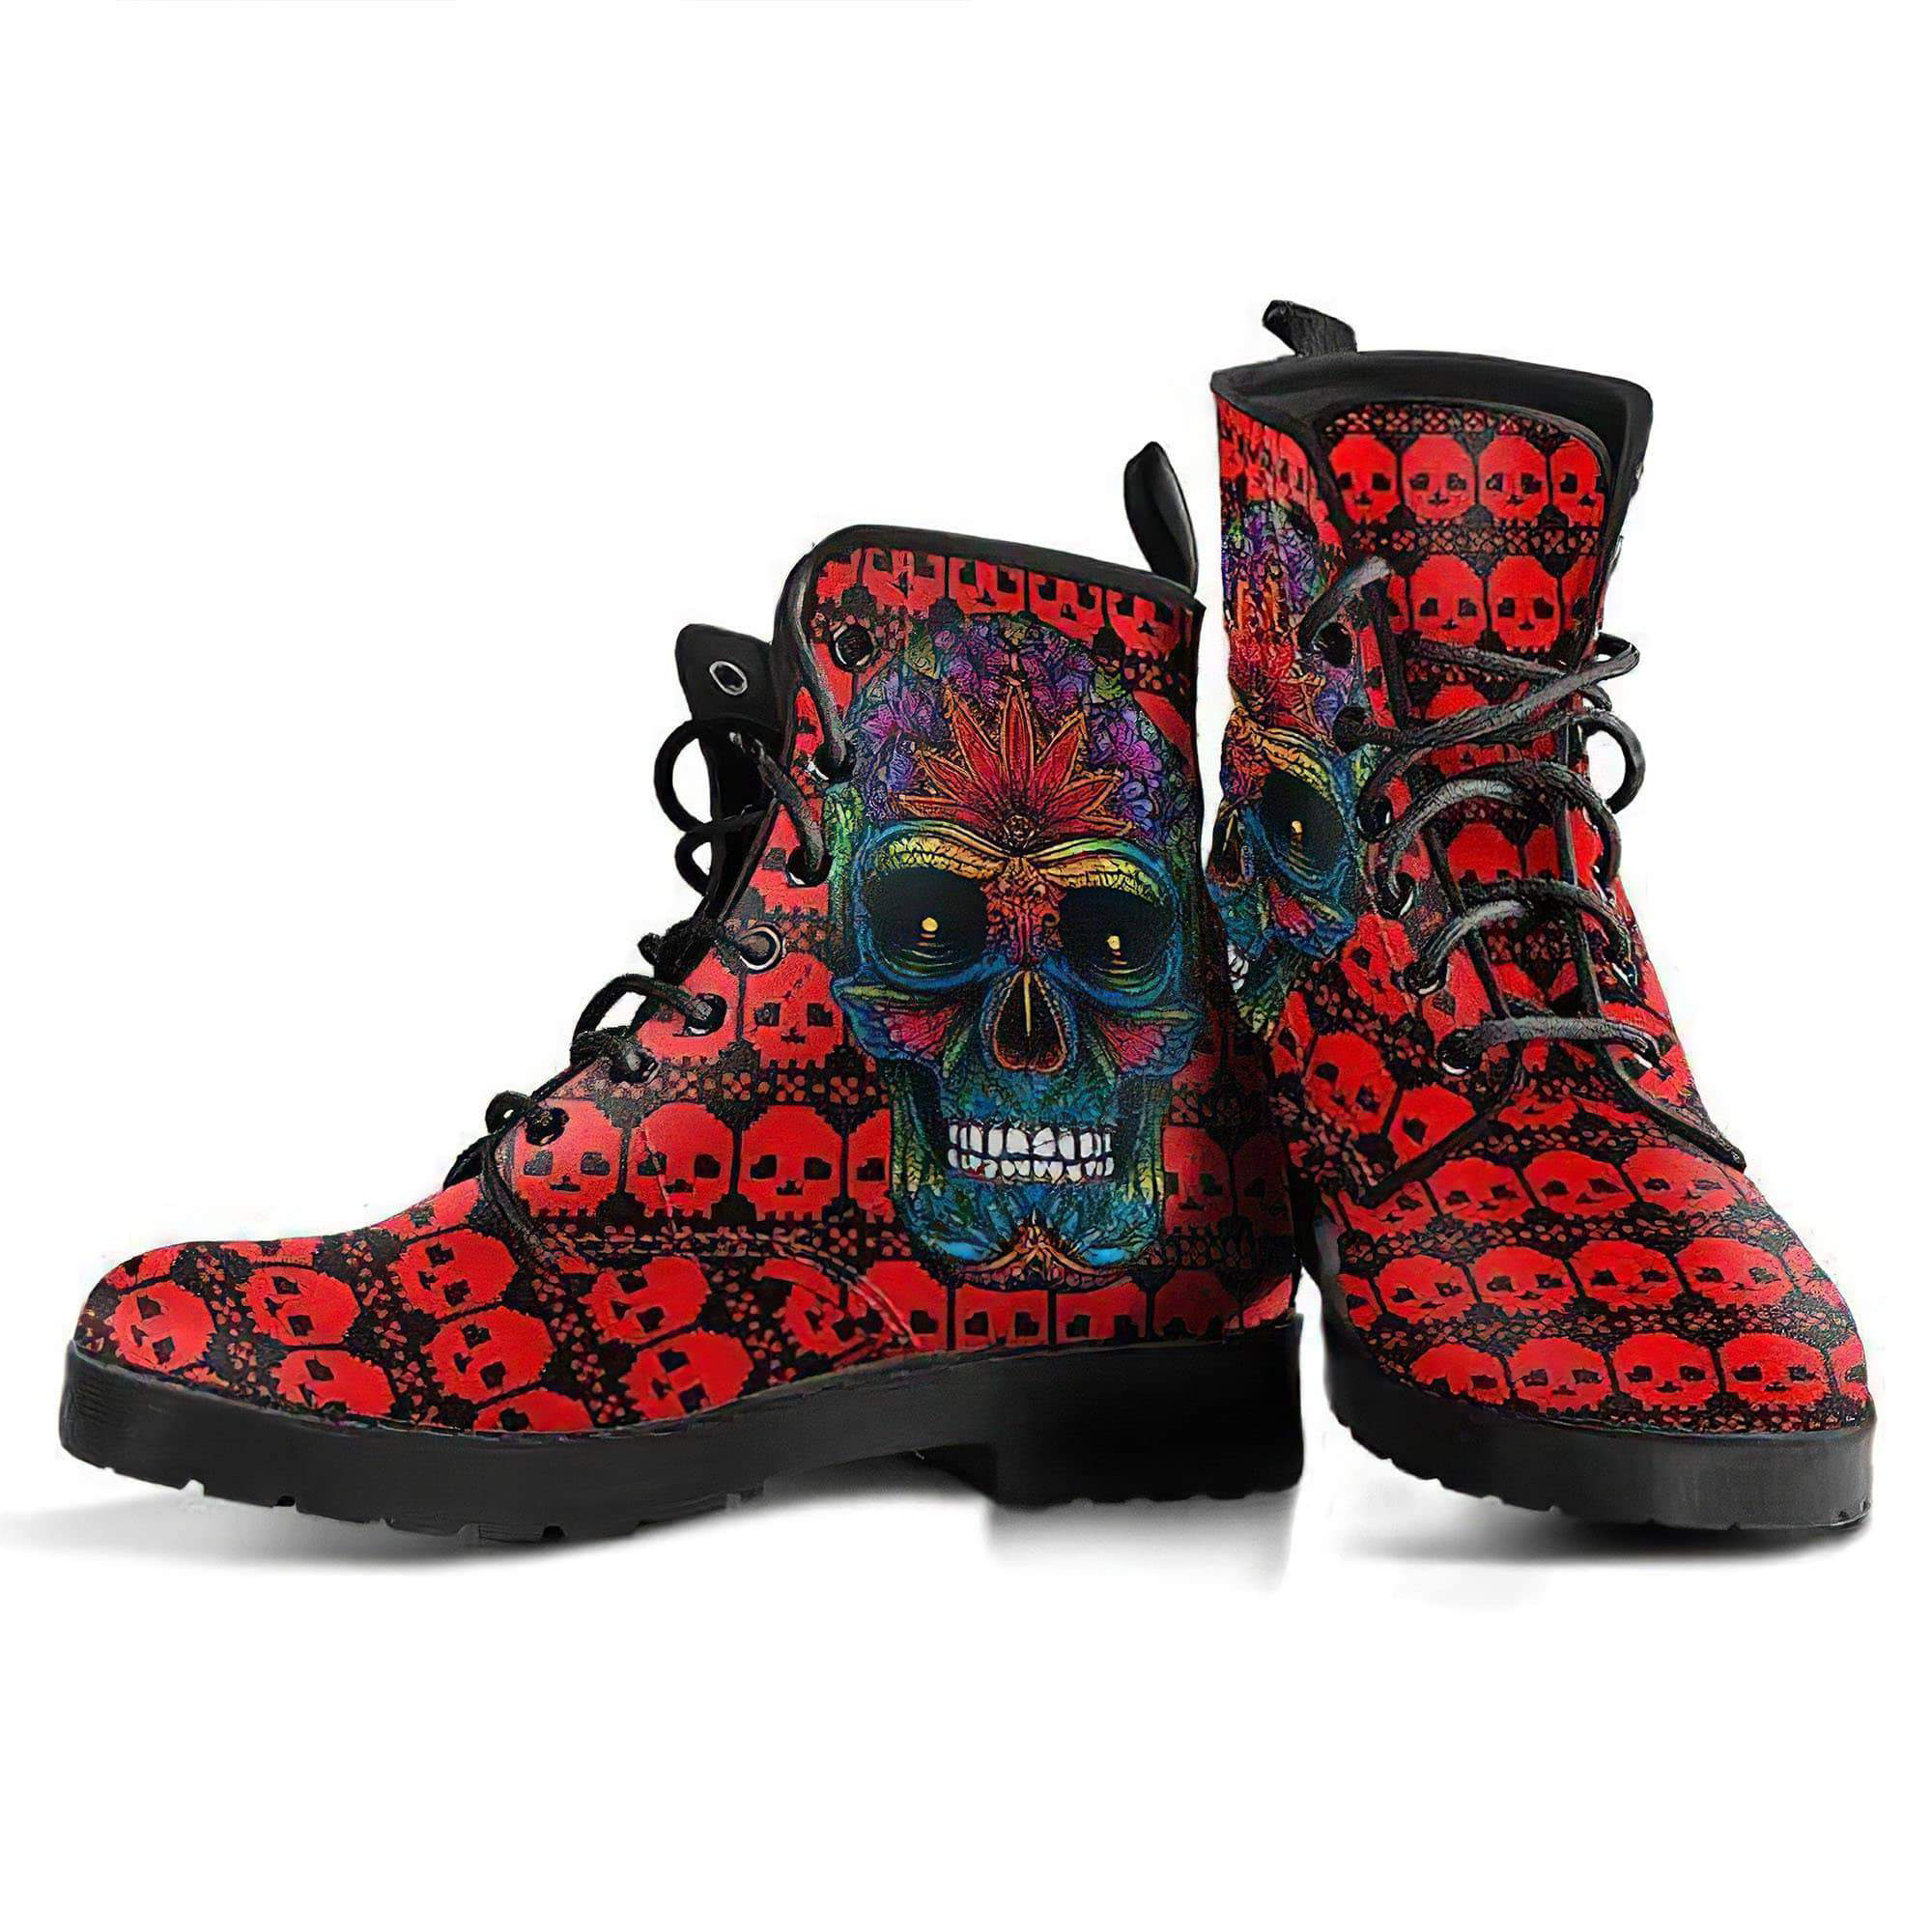 sugar-skull-women-s-leather-boots-women-s-leather-boots-12051956629565.jpg